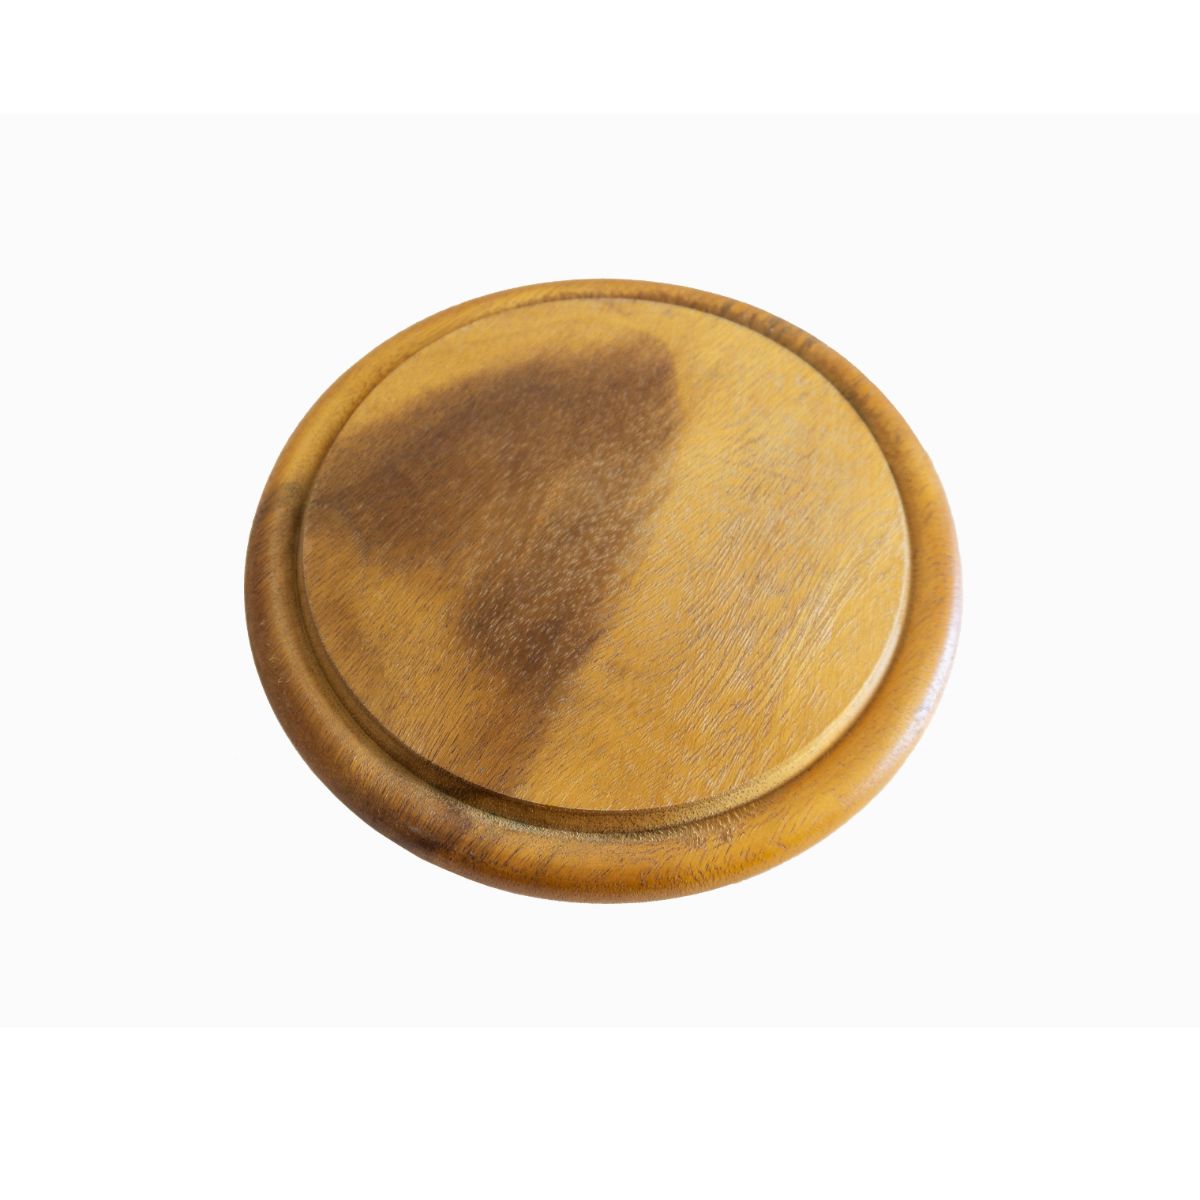  Pizza Pan Charger Plate 